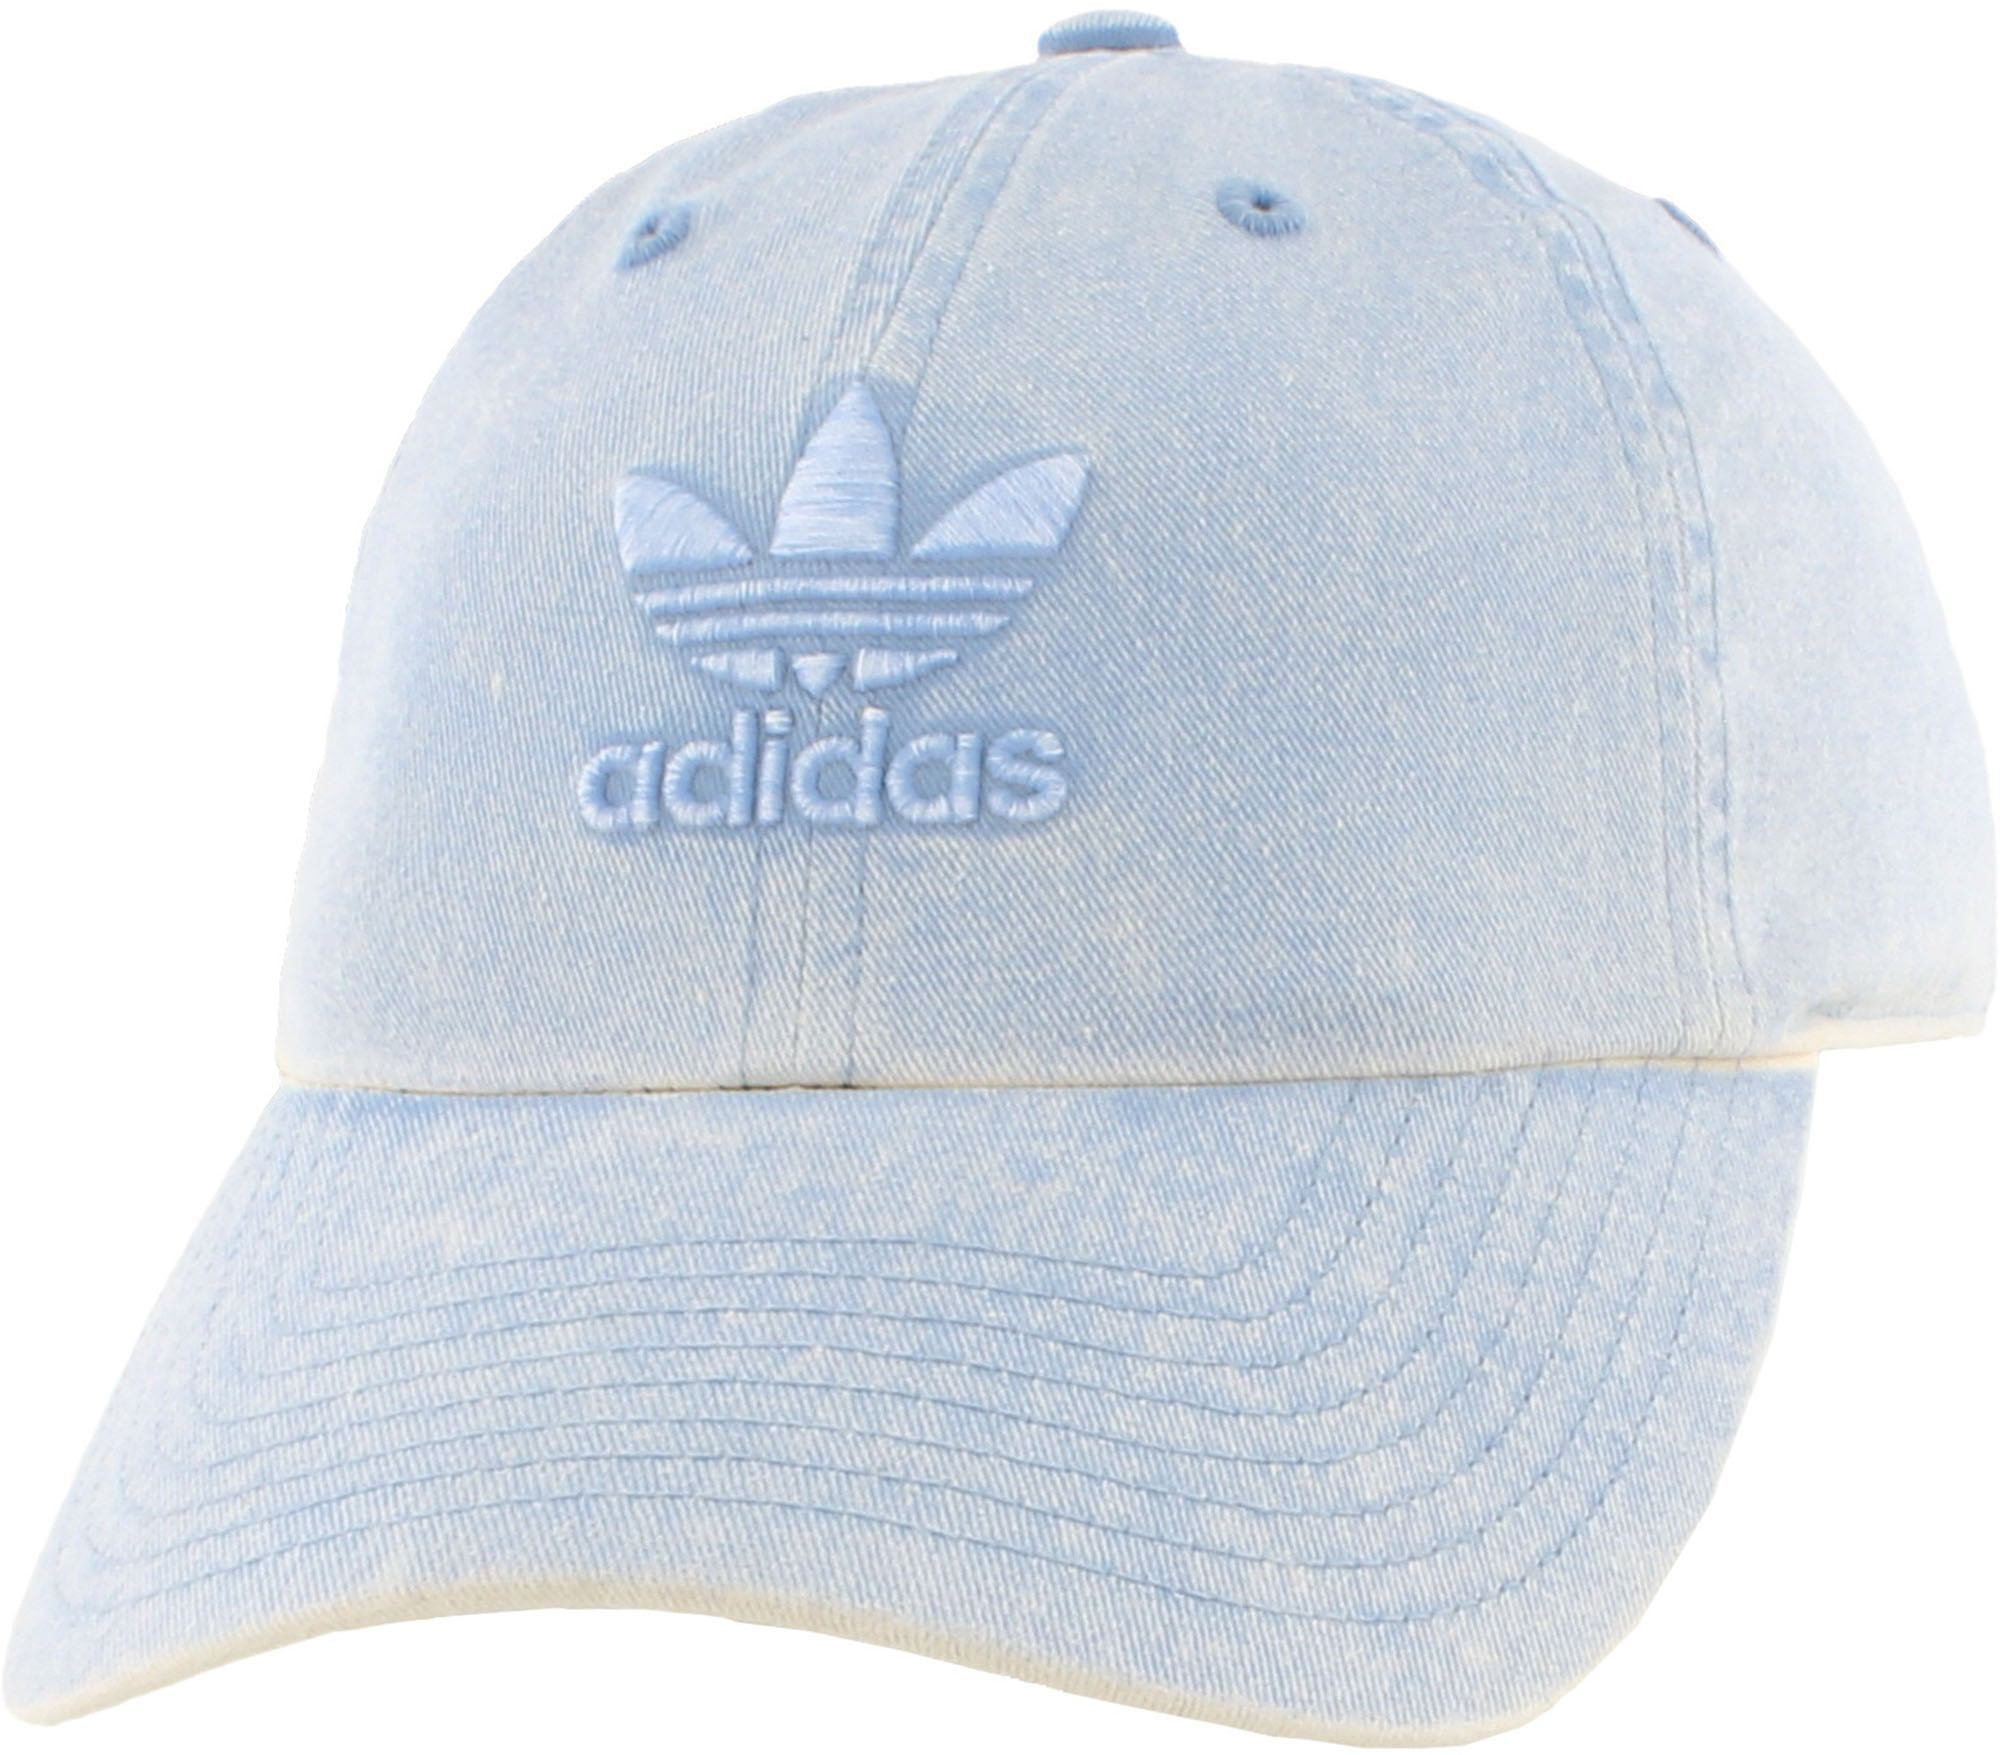 adidas women's relaxed hat